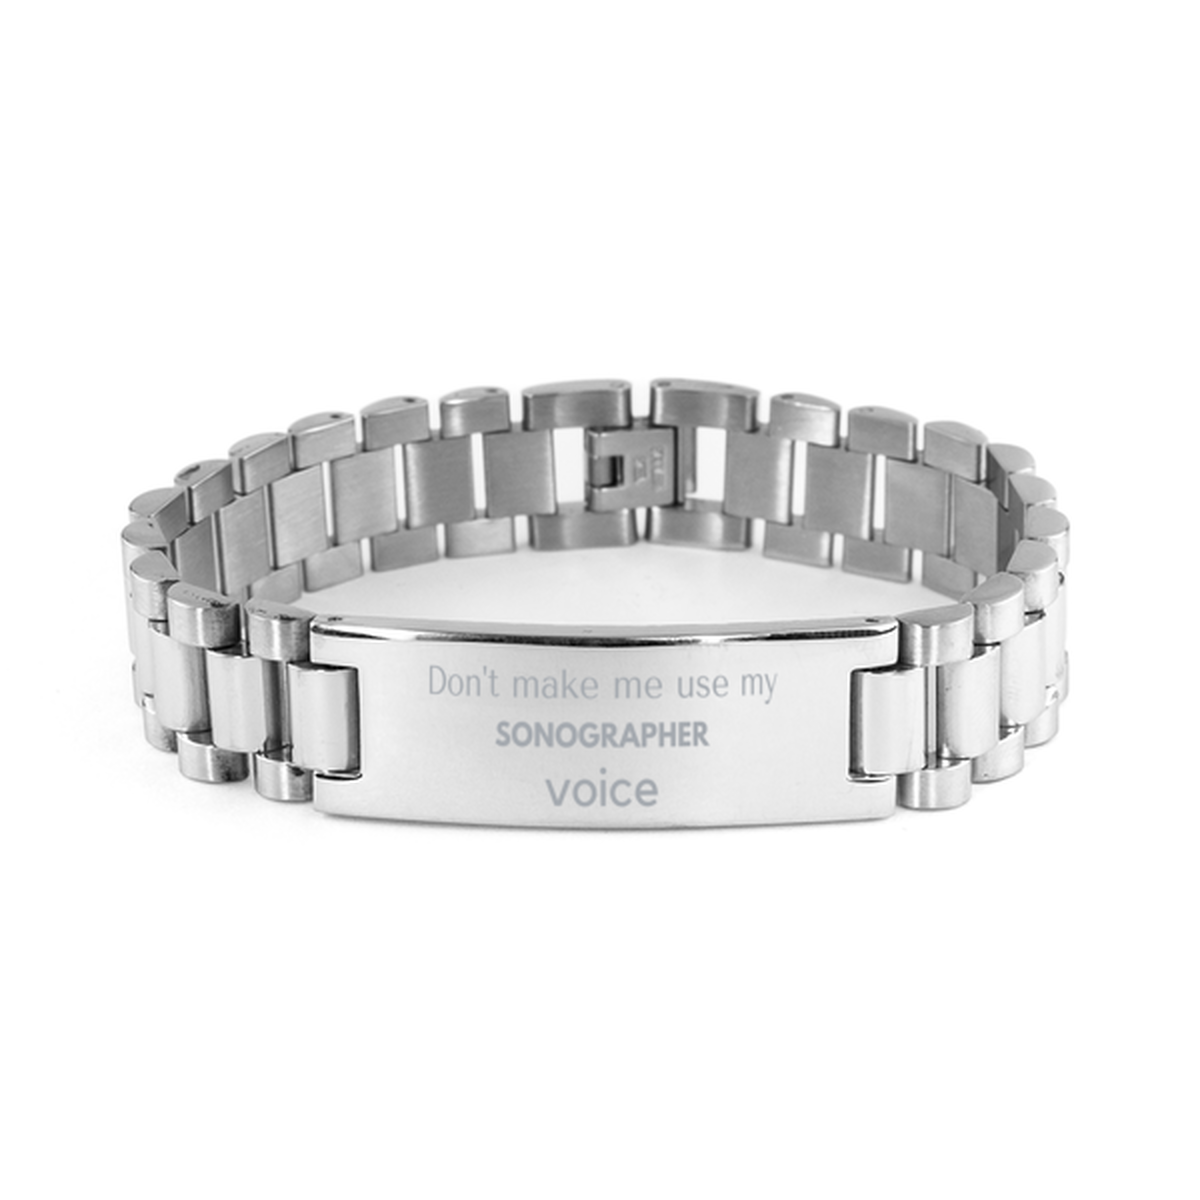 Don't make me use my Sonographer voice, Sarcasm Sonographer Gifts, Christmas Sonographer Ladder Stainless Steel Bracelet Birthday Unique Gifts For Sonographer Coworkers, Men, Women, Colleague, Friends